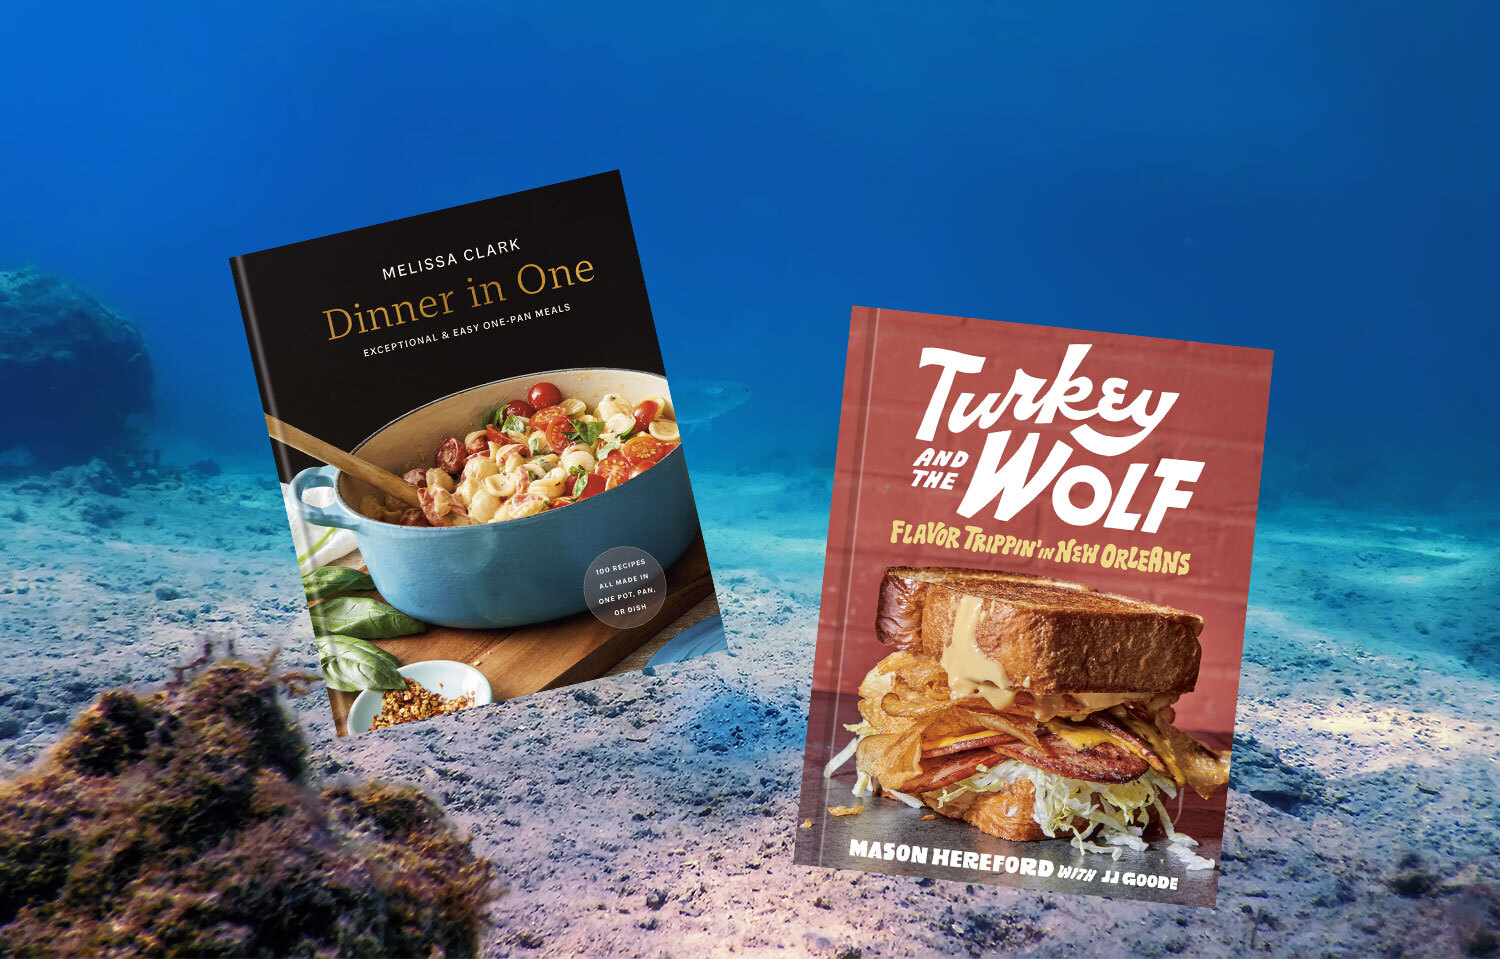 A photoshopped image depicting two cookbooks against an oceanic background.